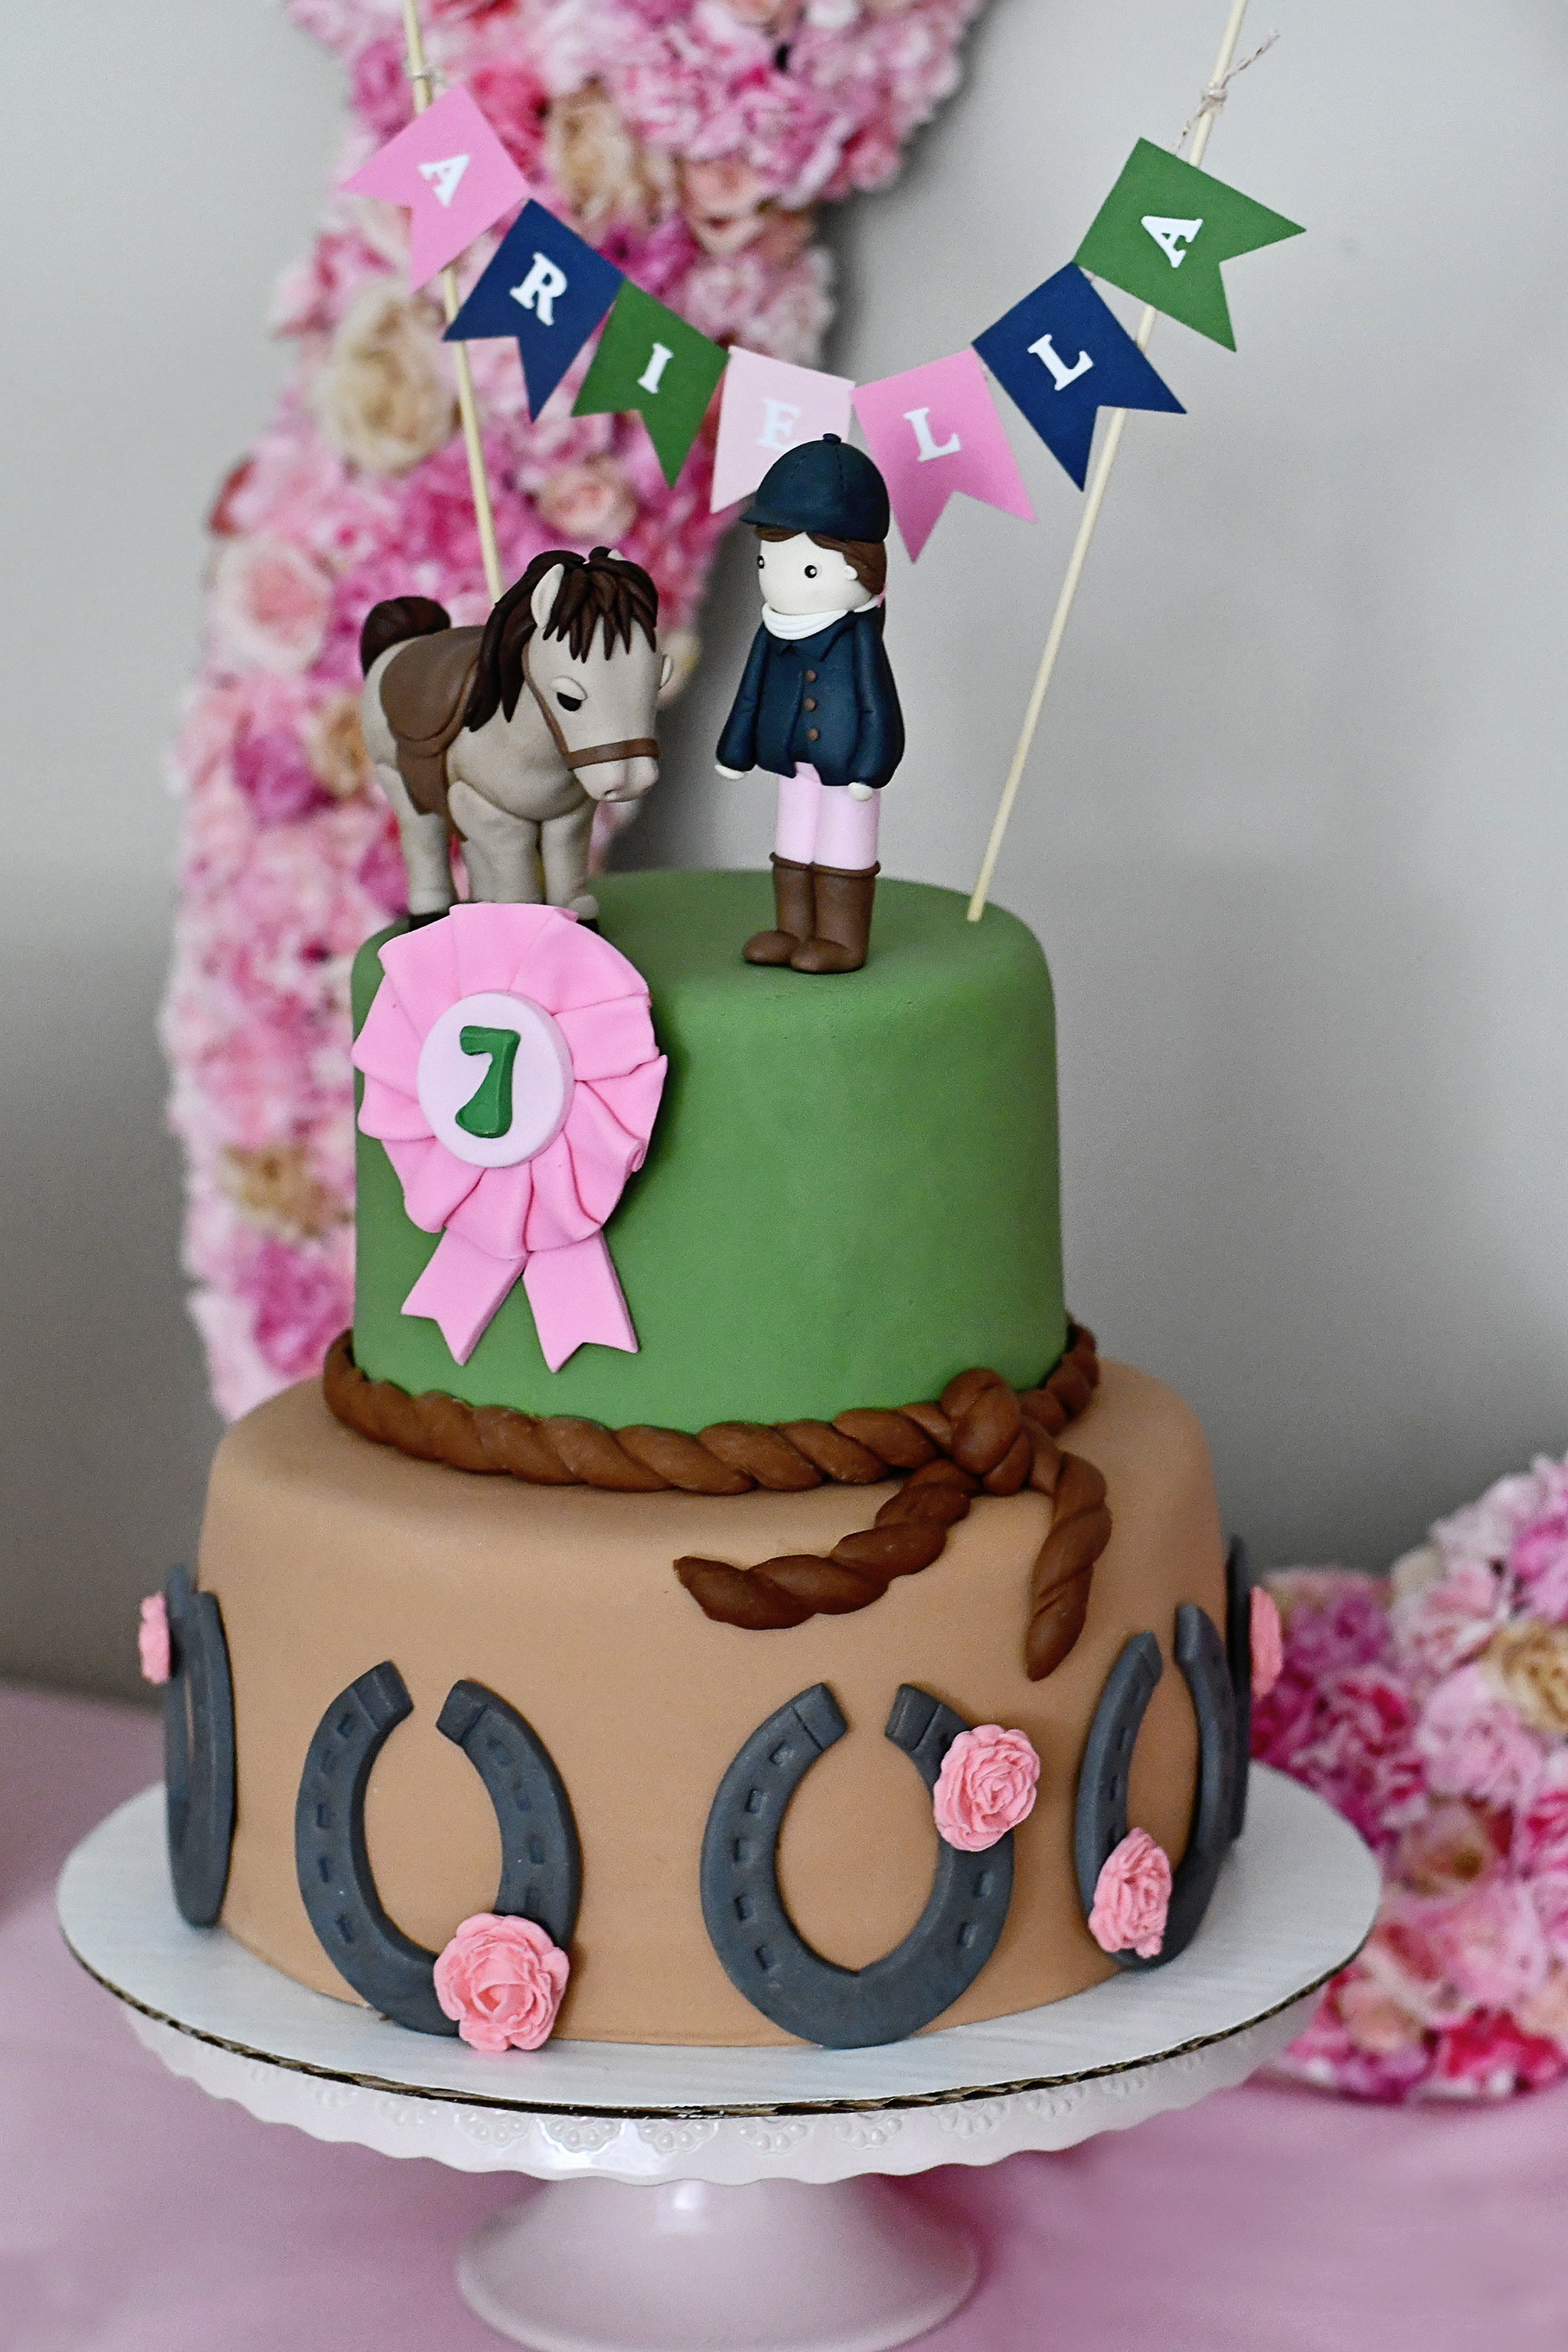 Cake Topper designed by Les Pop Sweets!